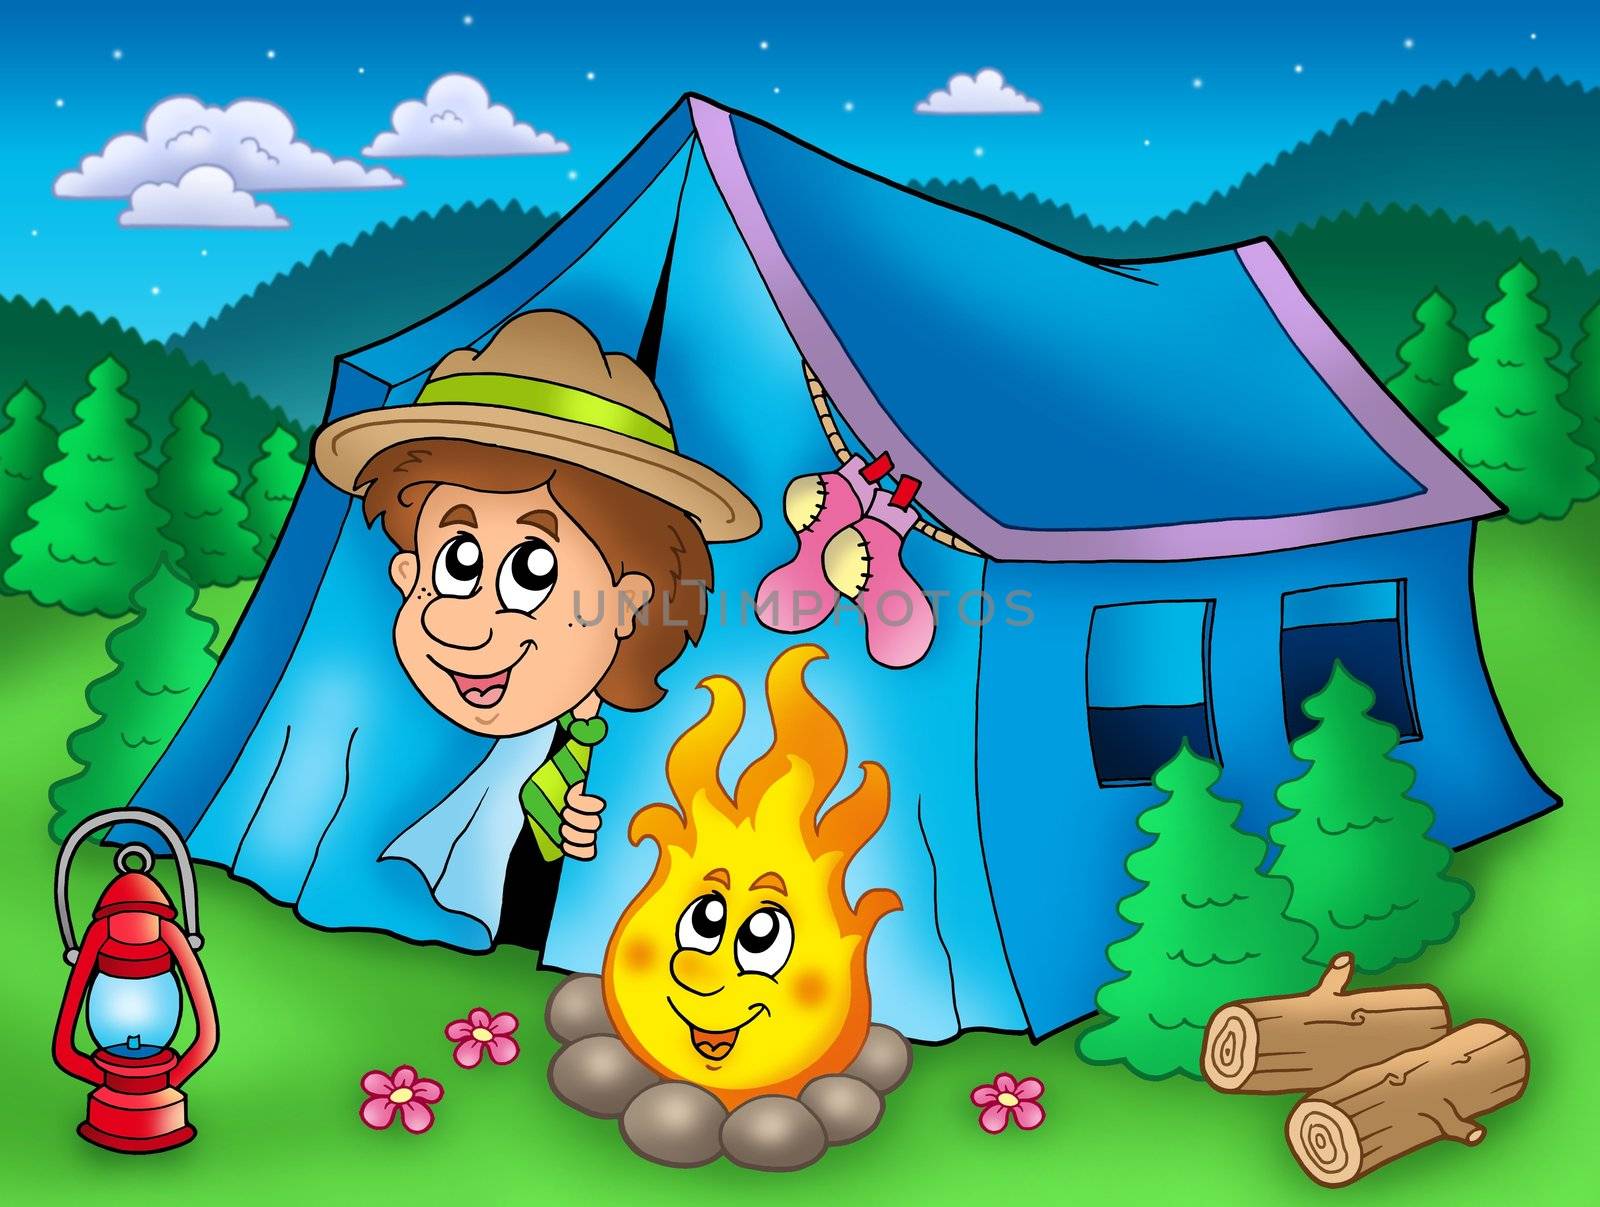 Cartoon scout boy in tent by clairev